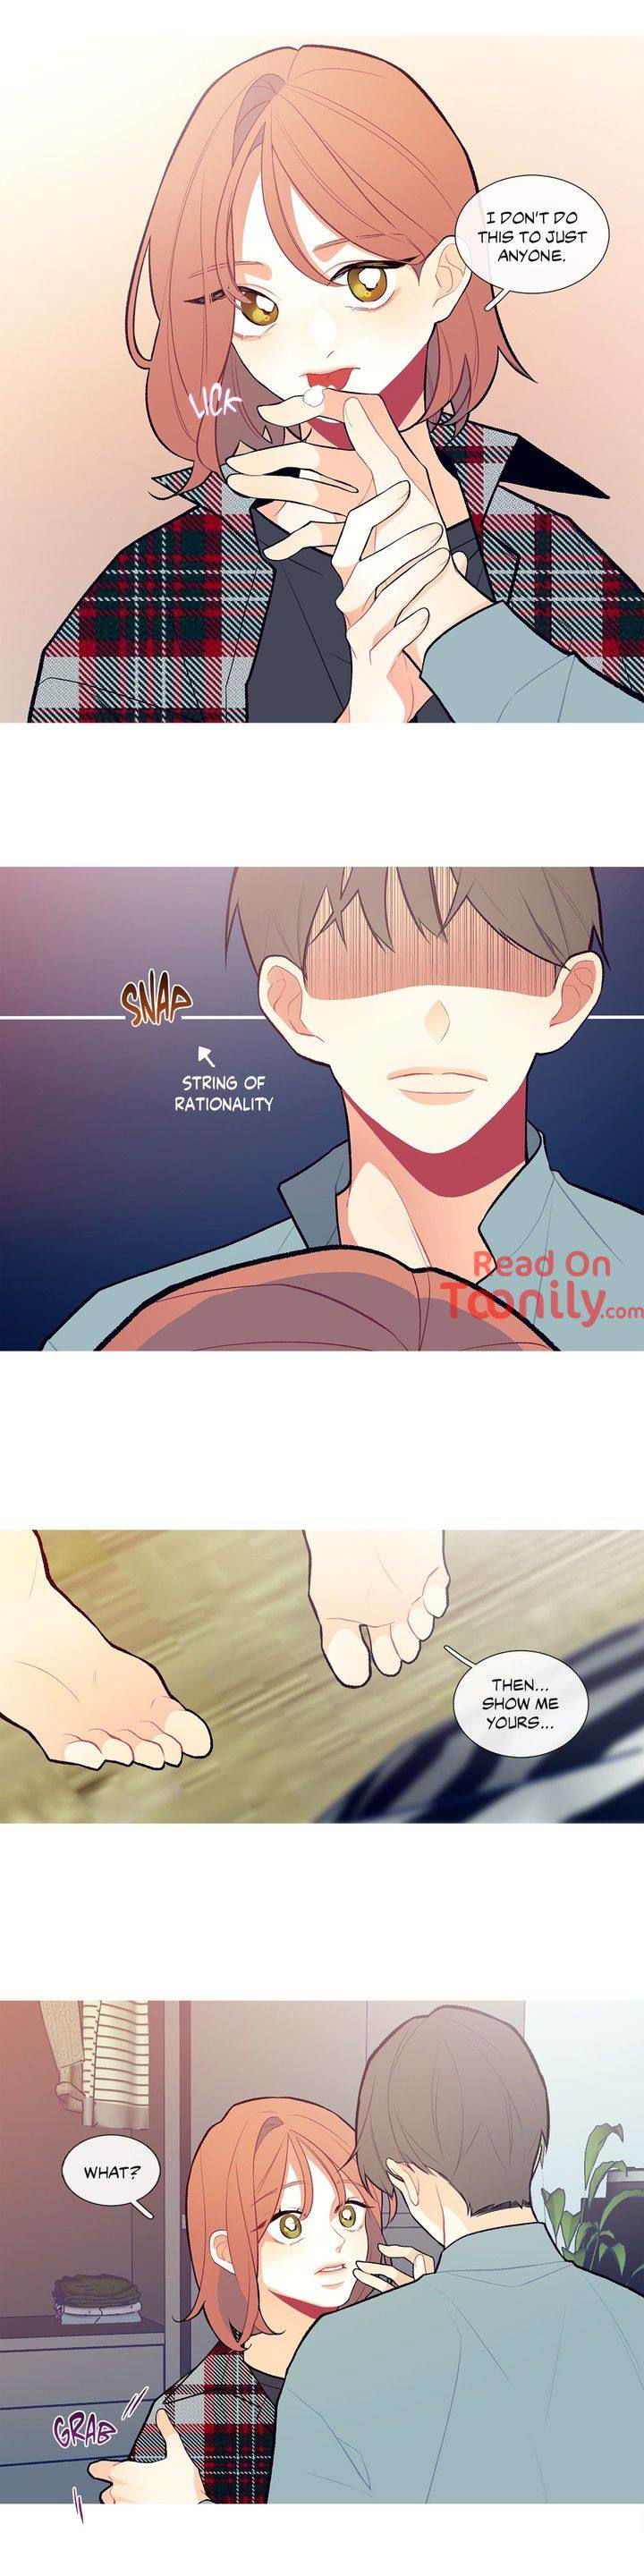 whats-going-on-chap-3-17